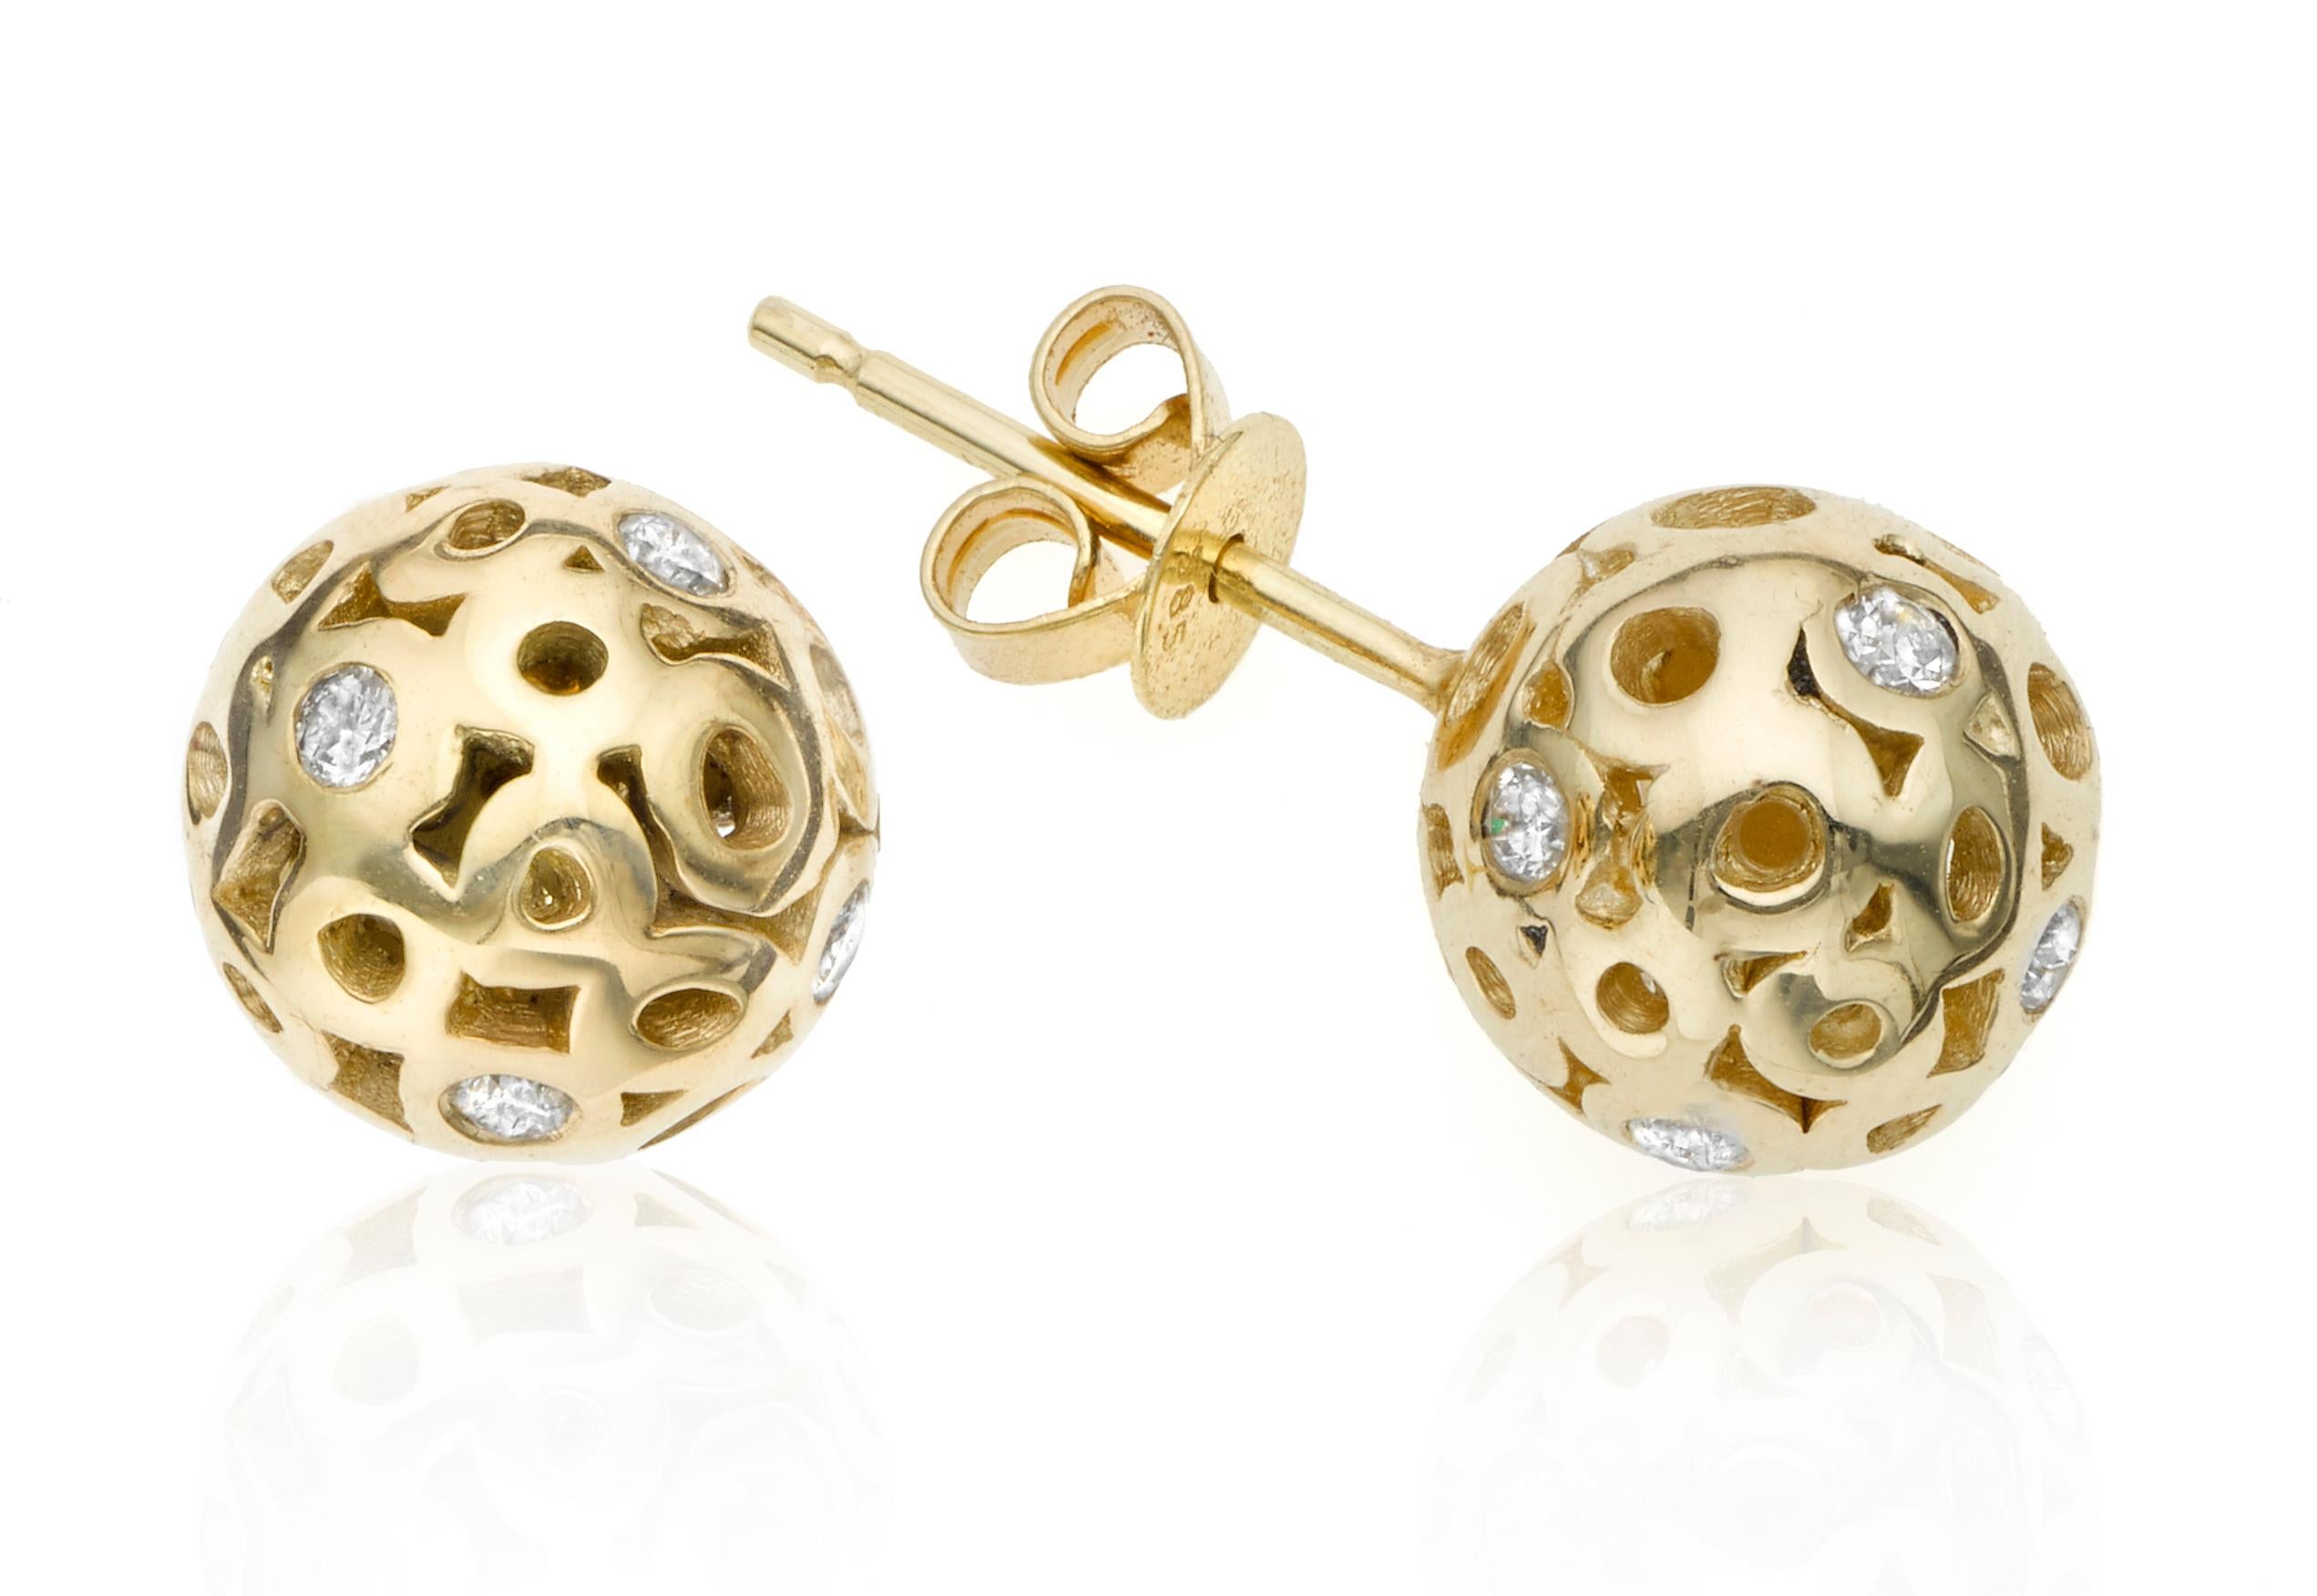 This is not your ordinary classic stud earring.  Made of two half-spheres composed of Hi June Parker's signature organic circles sprinkled with white diamonds. Also a sophisticated and elegant option for bridal or weddings.

Inspired by seeing the